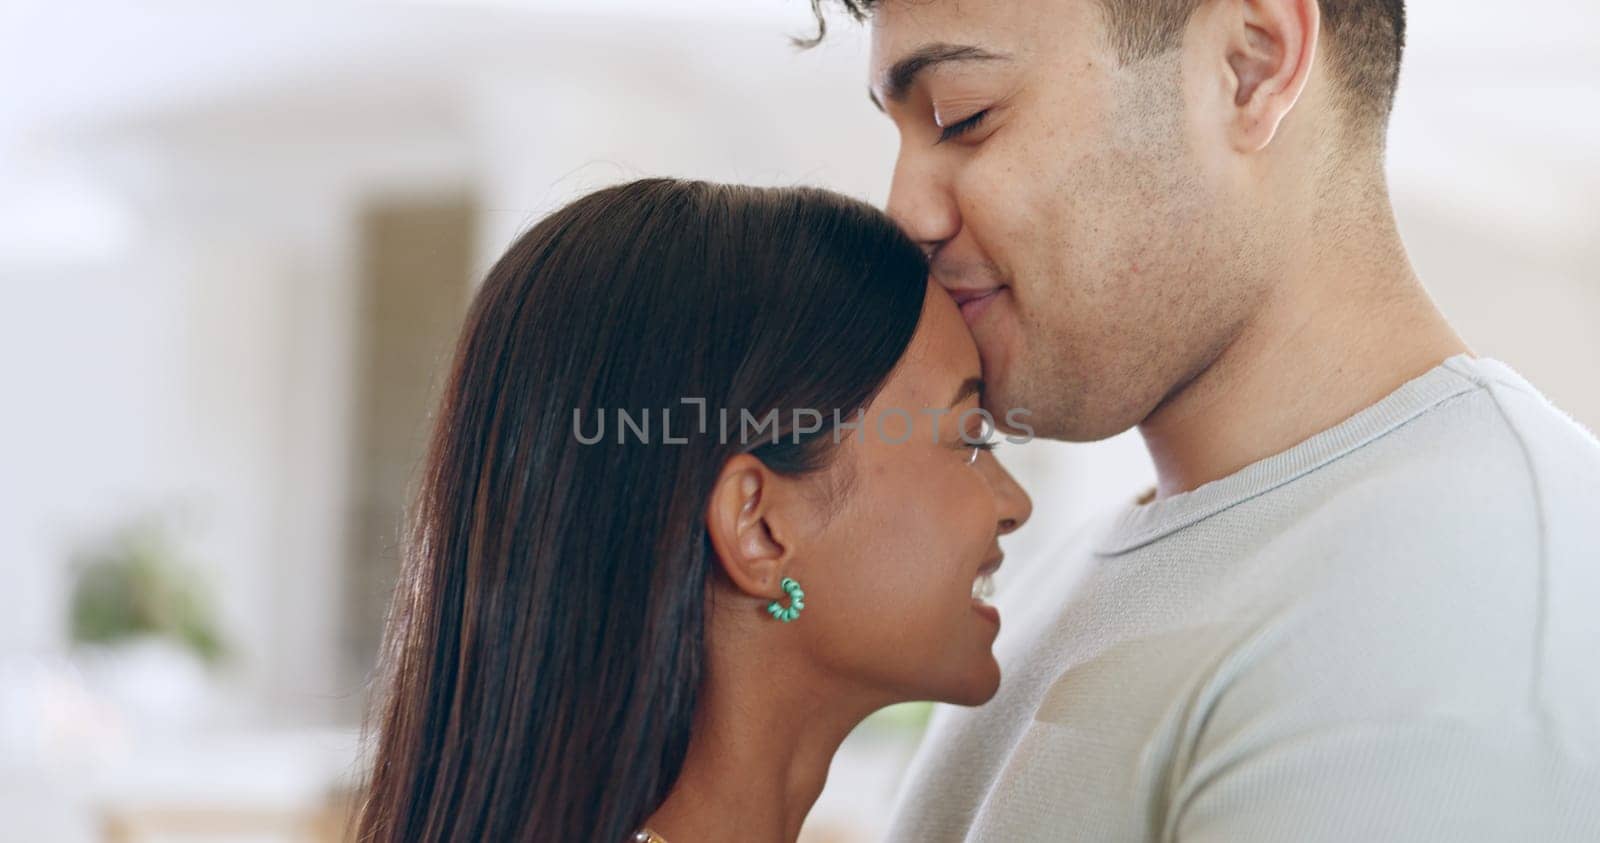 Face, love and trust with a couple closeup in their apartment together for care, romance or bonding. Relax, support or commitment with a happy young man and woman in their home on the weekend.